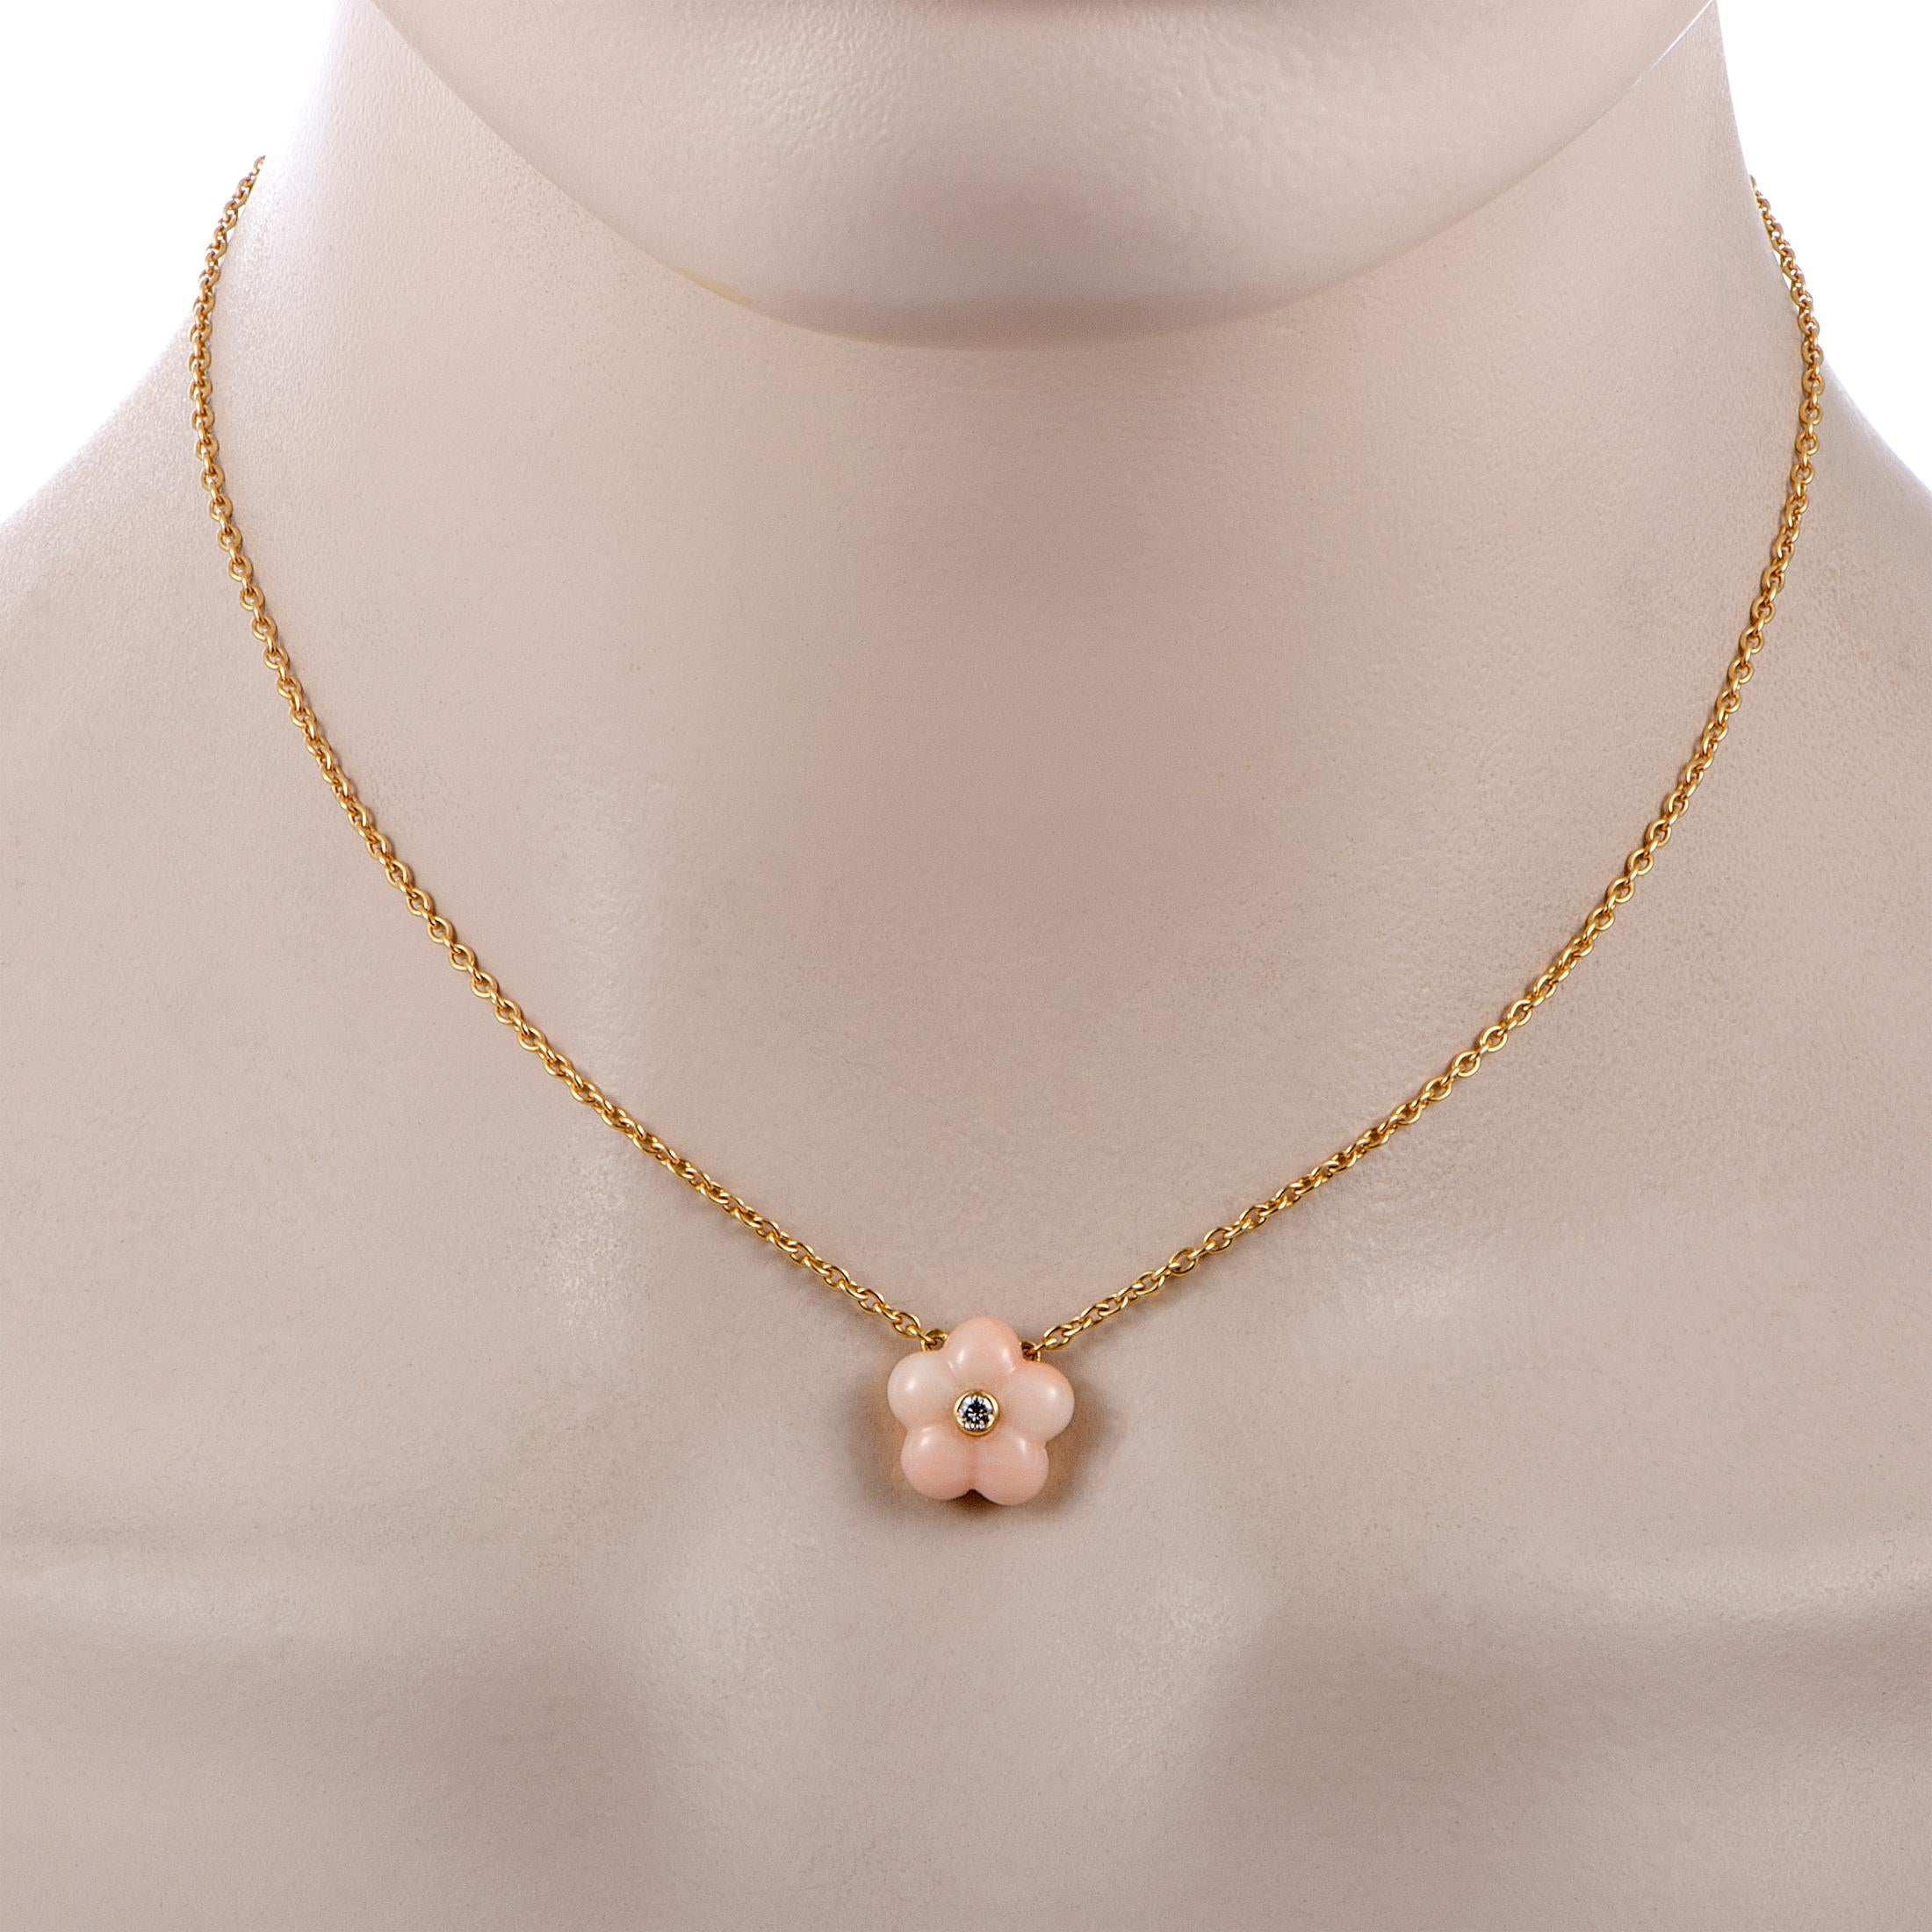 This Van Cleef & Arpels vintage necklace is made of 18K yellow gold and embellished with a diamond and a coral. Weighing 6.6 grams, the necklace is presented with a 15.00” chain featuring spring ring closure and a flower pendant that measures 0.50”